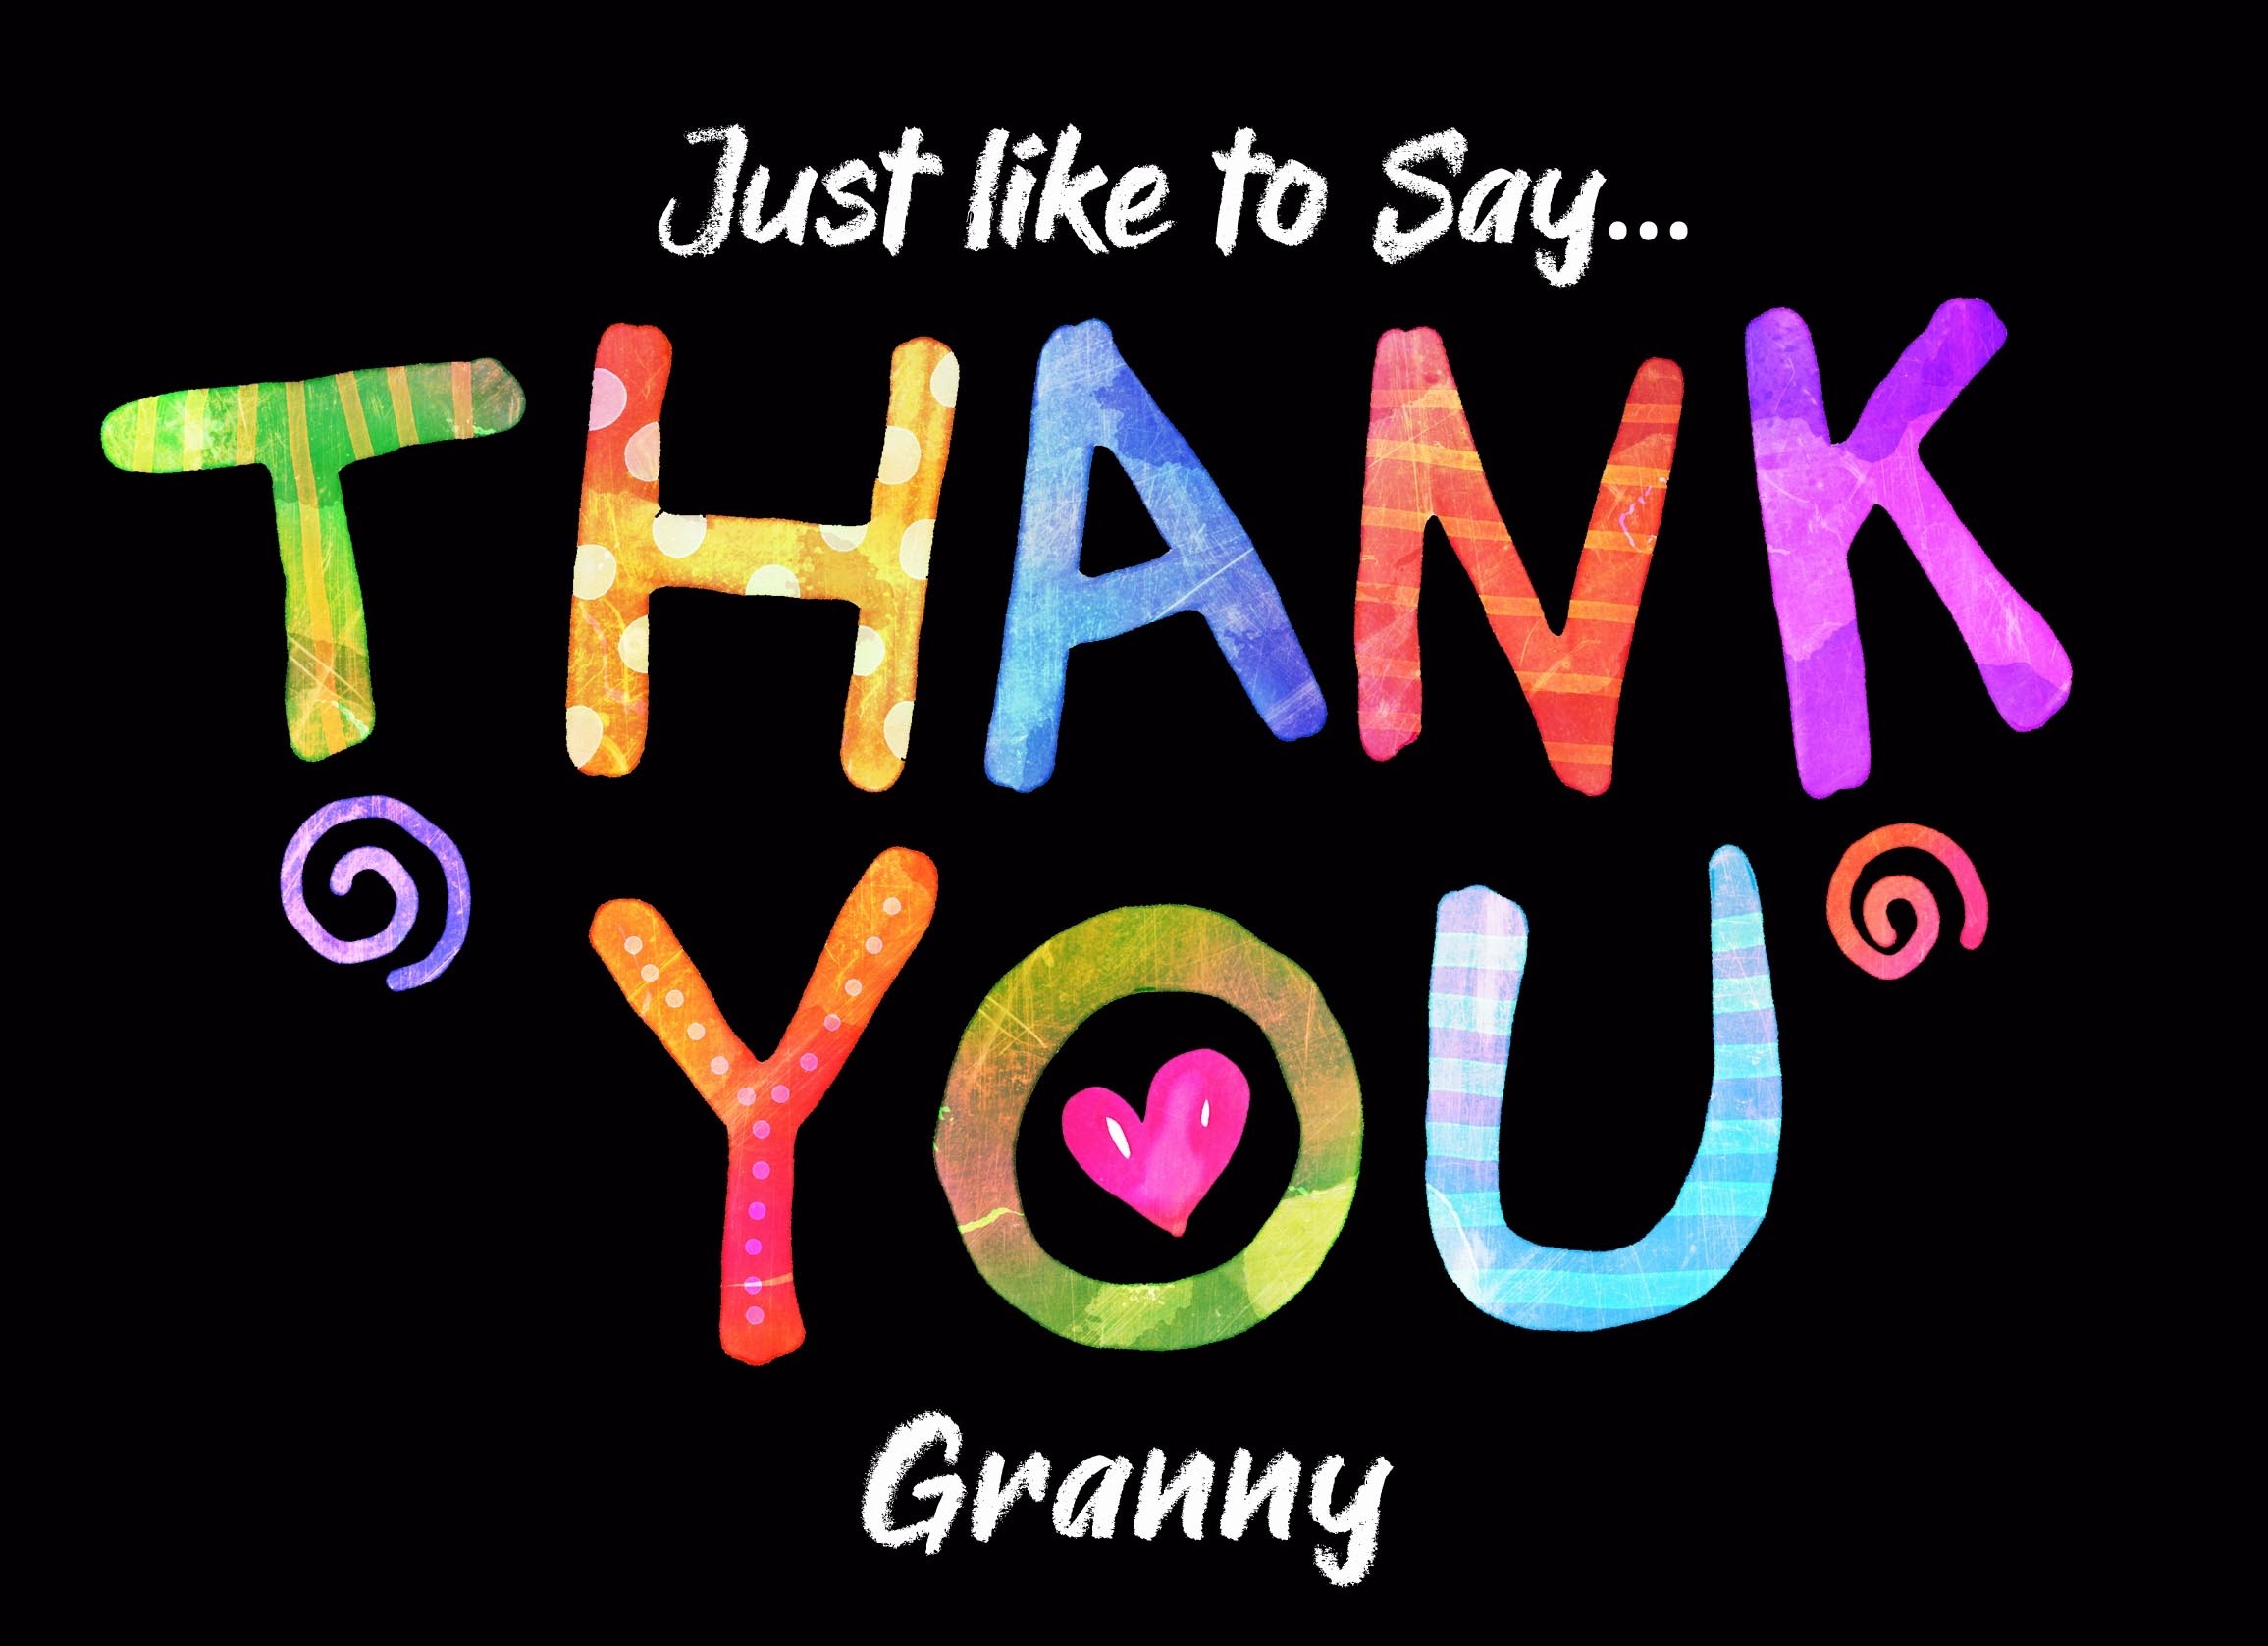 Thank You 'Granny' Greeting Card